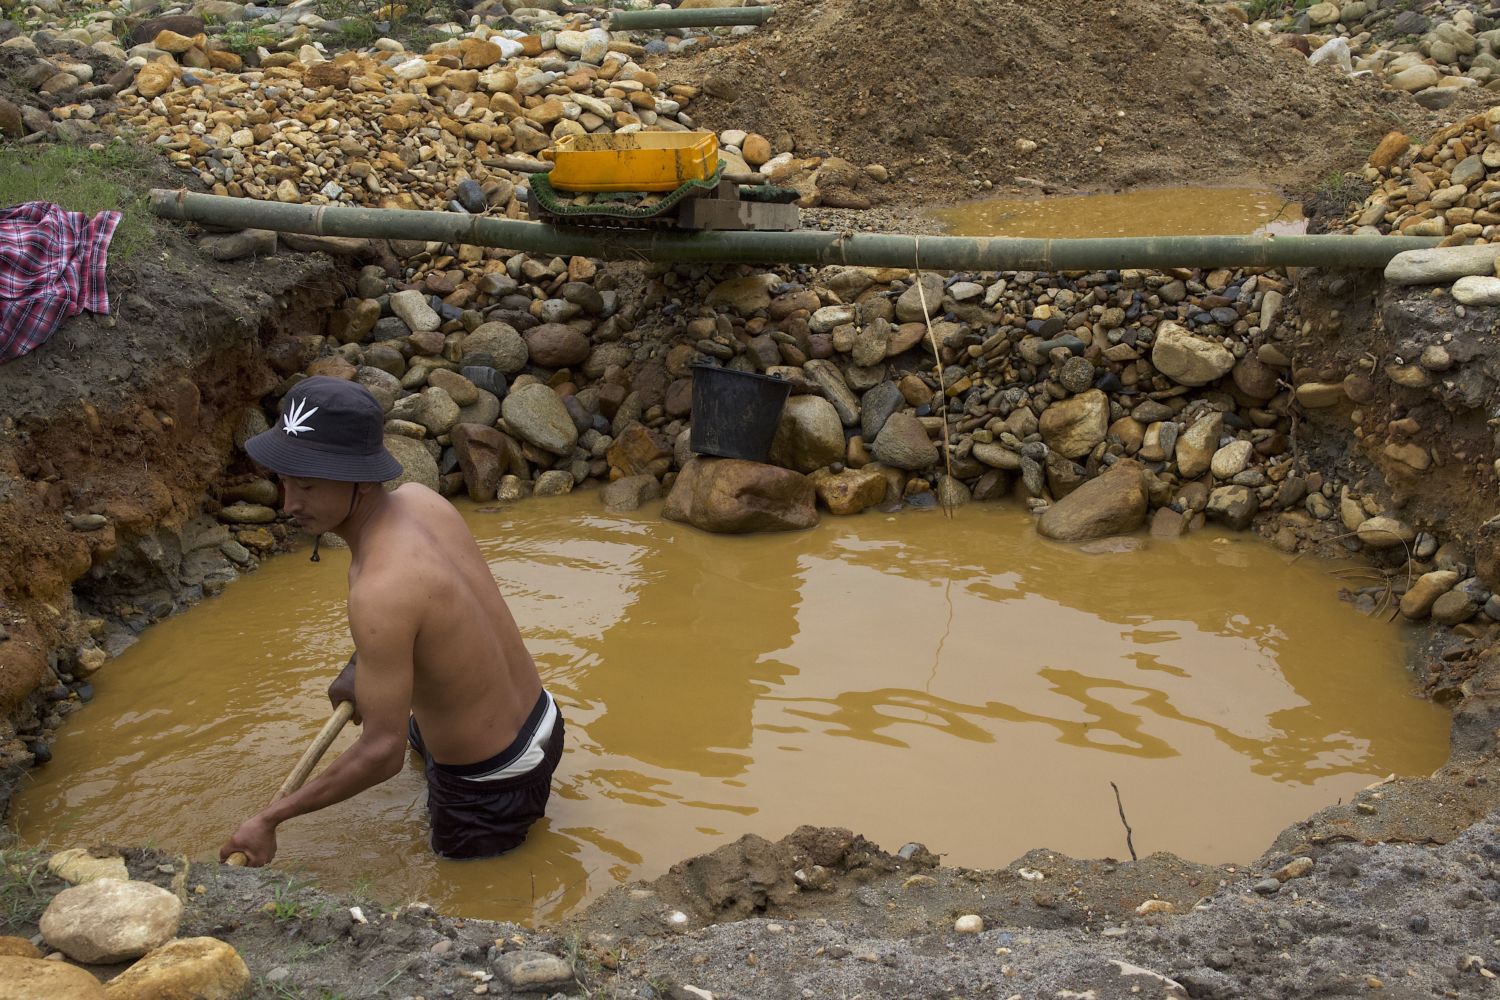 In the wake of coup, gold mining boom is ravaging Myanmar